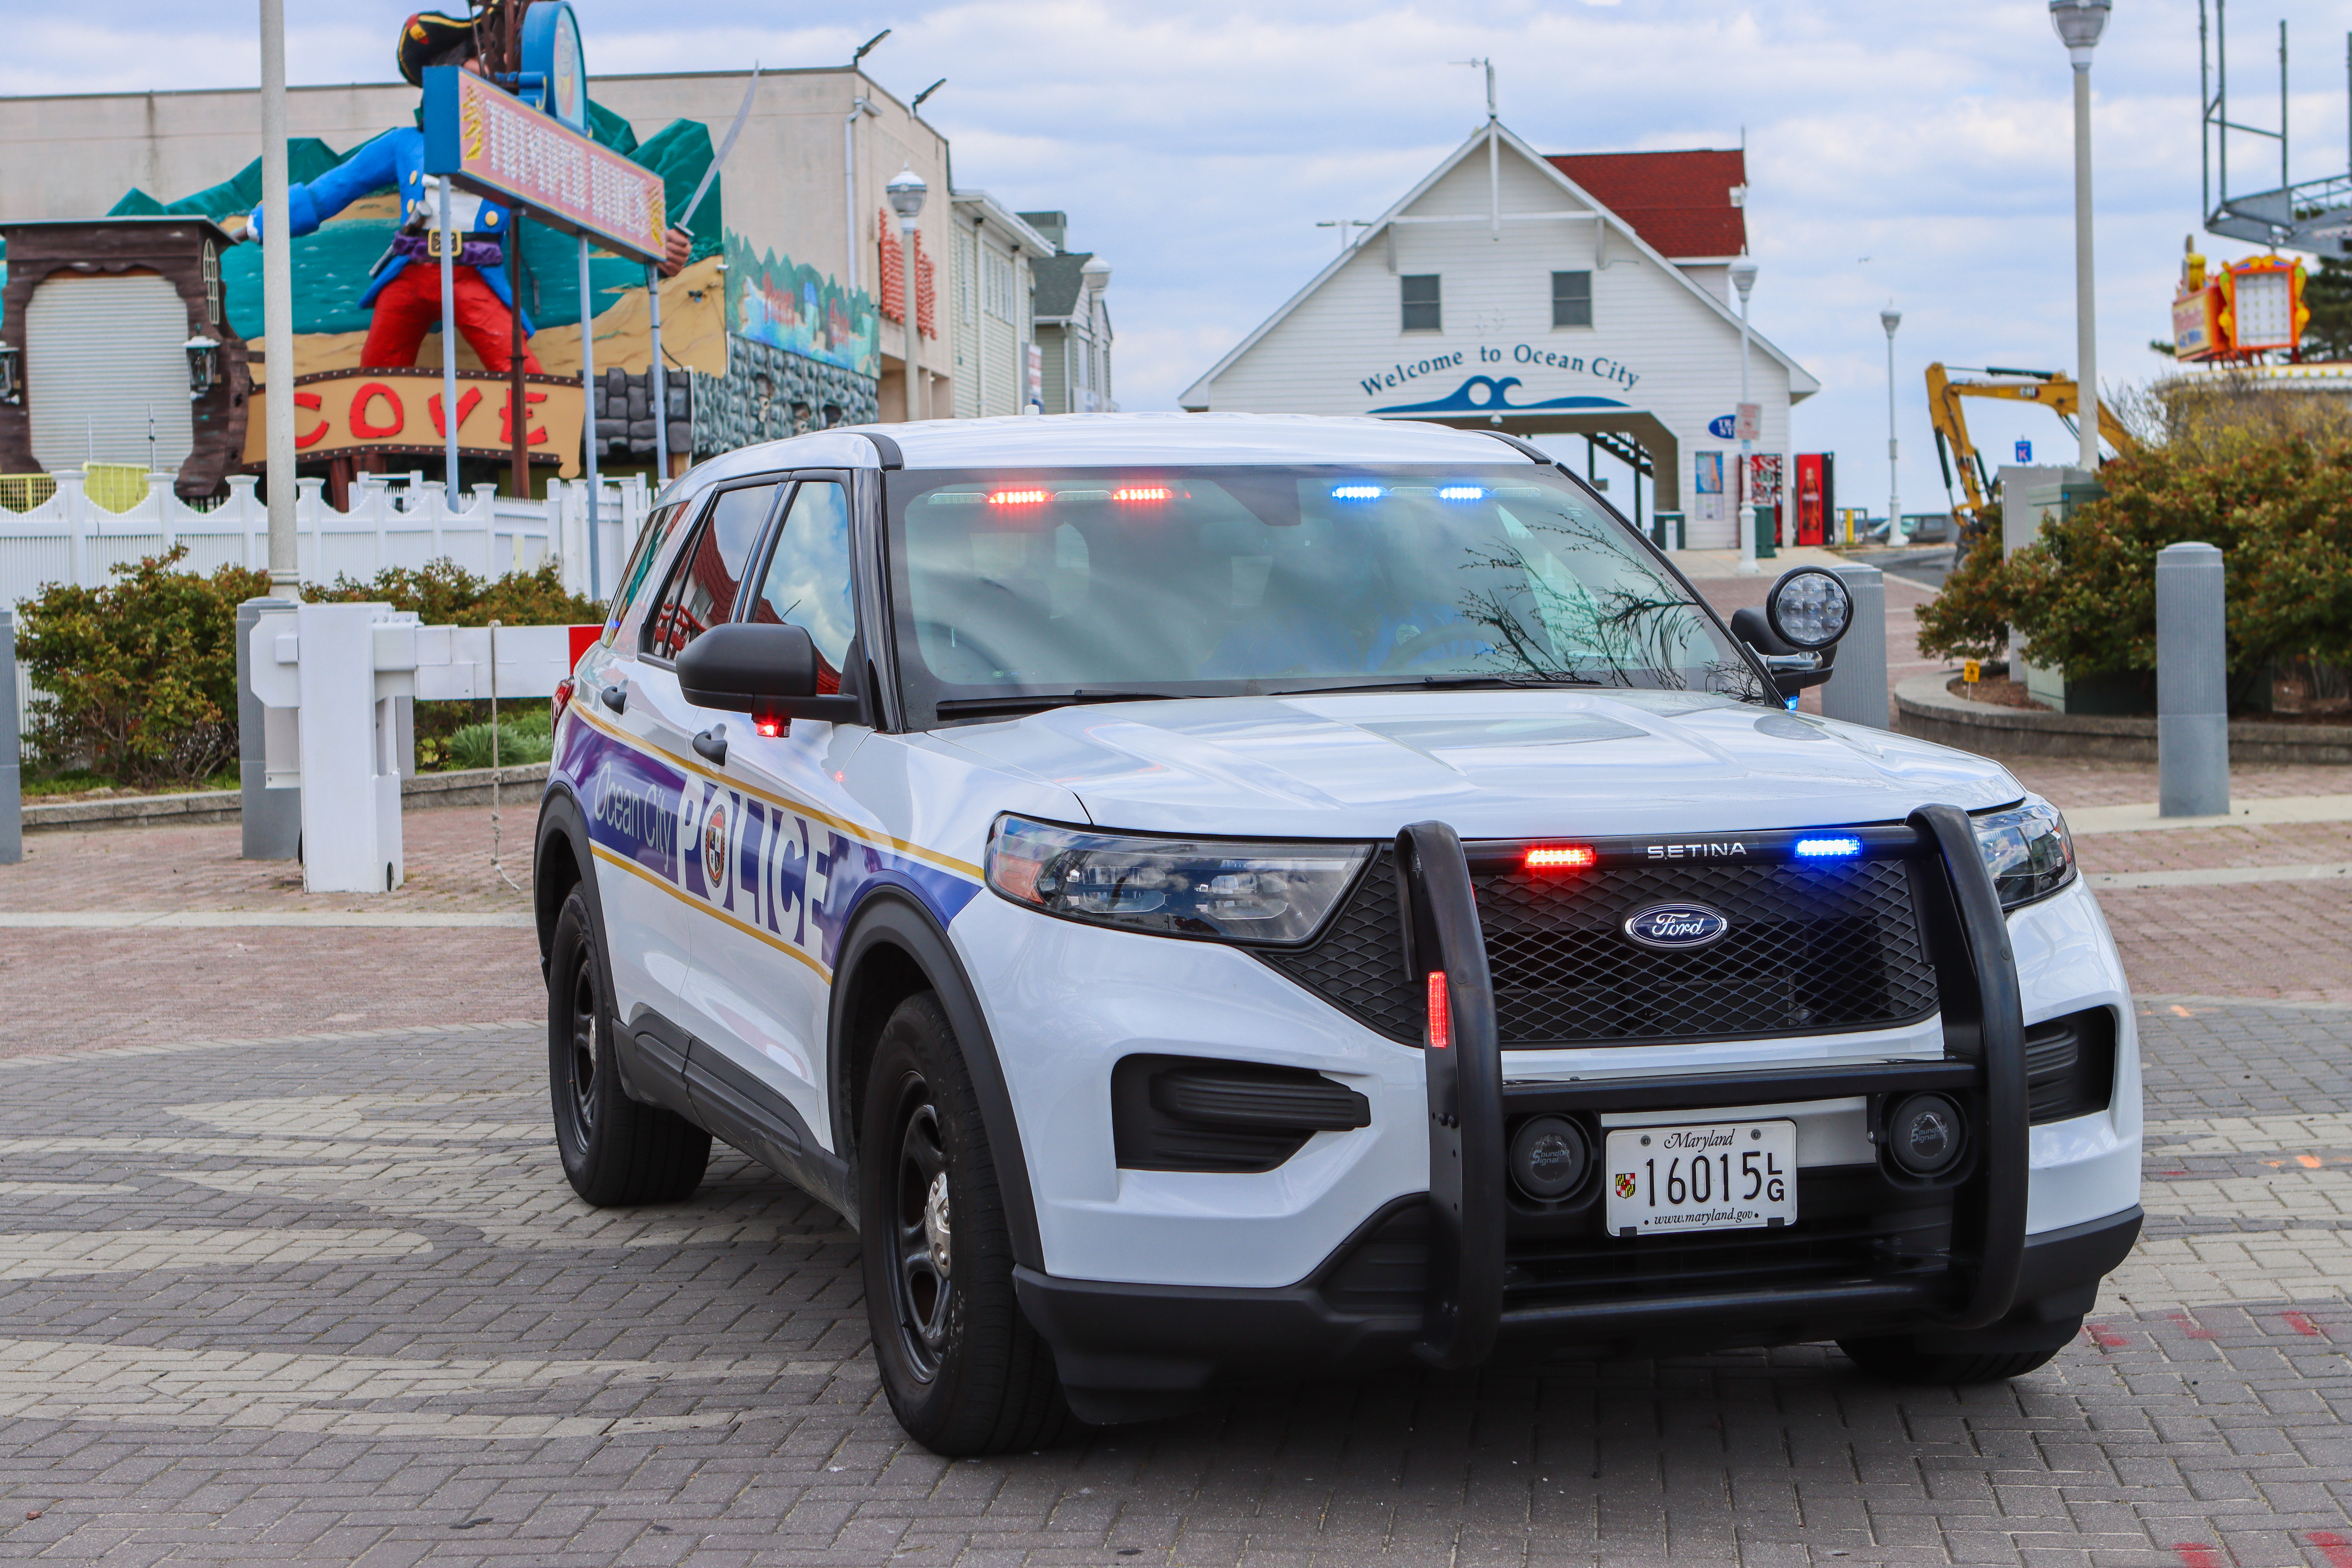 Ocean City Police Department, MD Public Safety Jobs